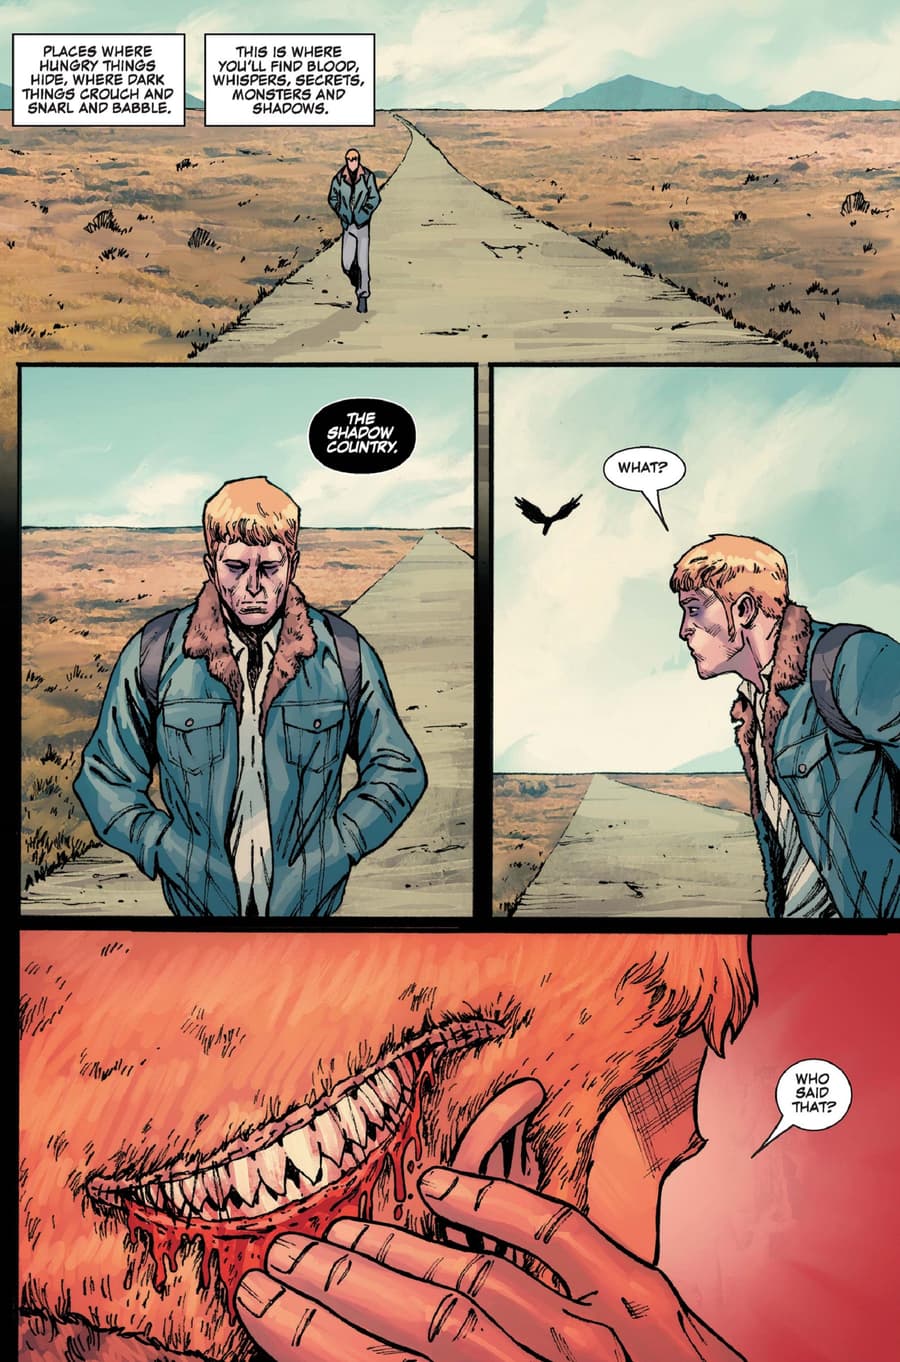 Preview from GHOST RIDER (2022) #3 with art by Cory Smith, Brent Peeples, Roberto Poggi, and Bryan Valenza.